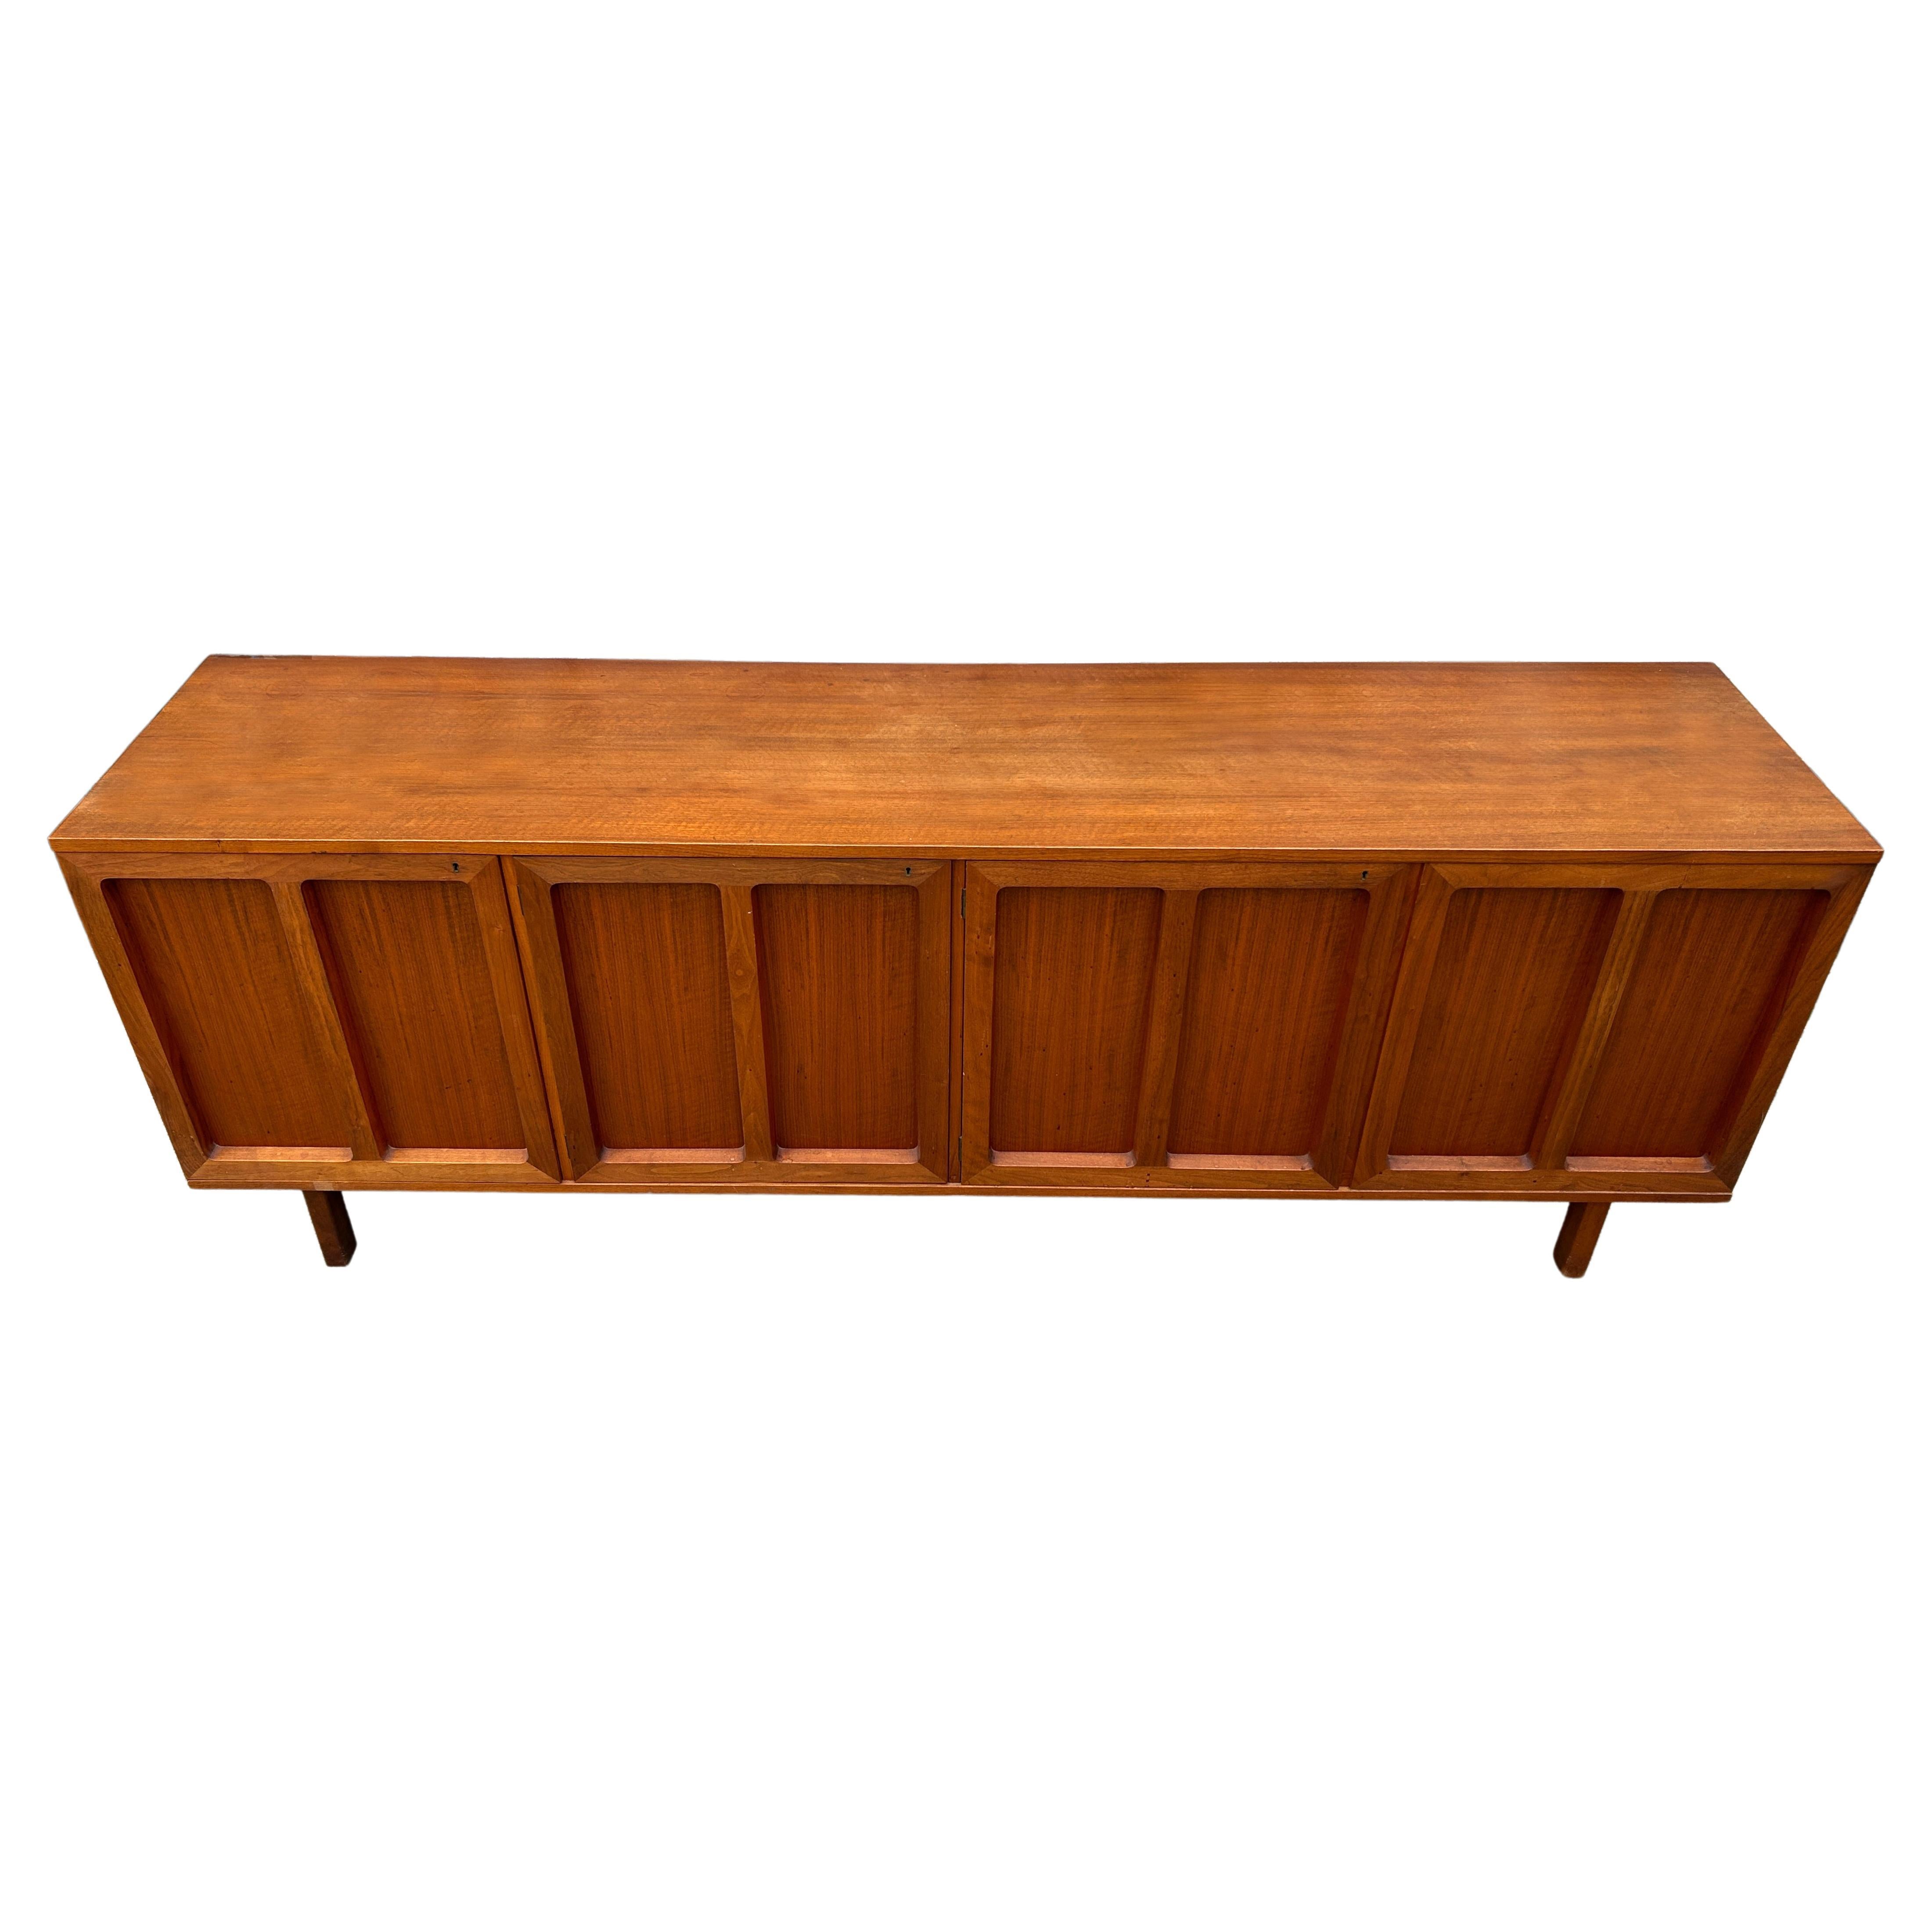 Beautiful high quality mid-century Swedish credenza by Karl Erik Ekselius for J.O. Carlsson Scandinavian Modern 4 Door credenza or sideboard 3 keys 6 flat drawers with a three-quarter gallery and open shelves sits on 4 straight solid teak legs. 3